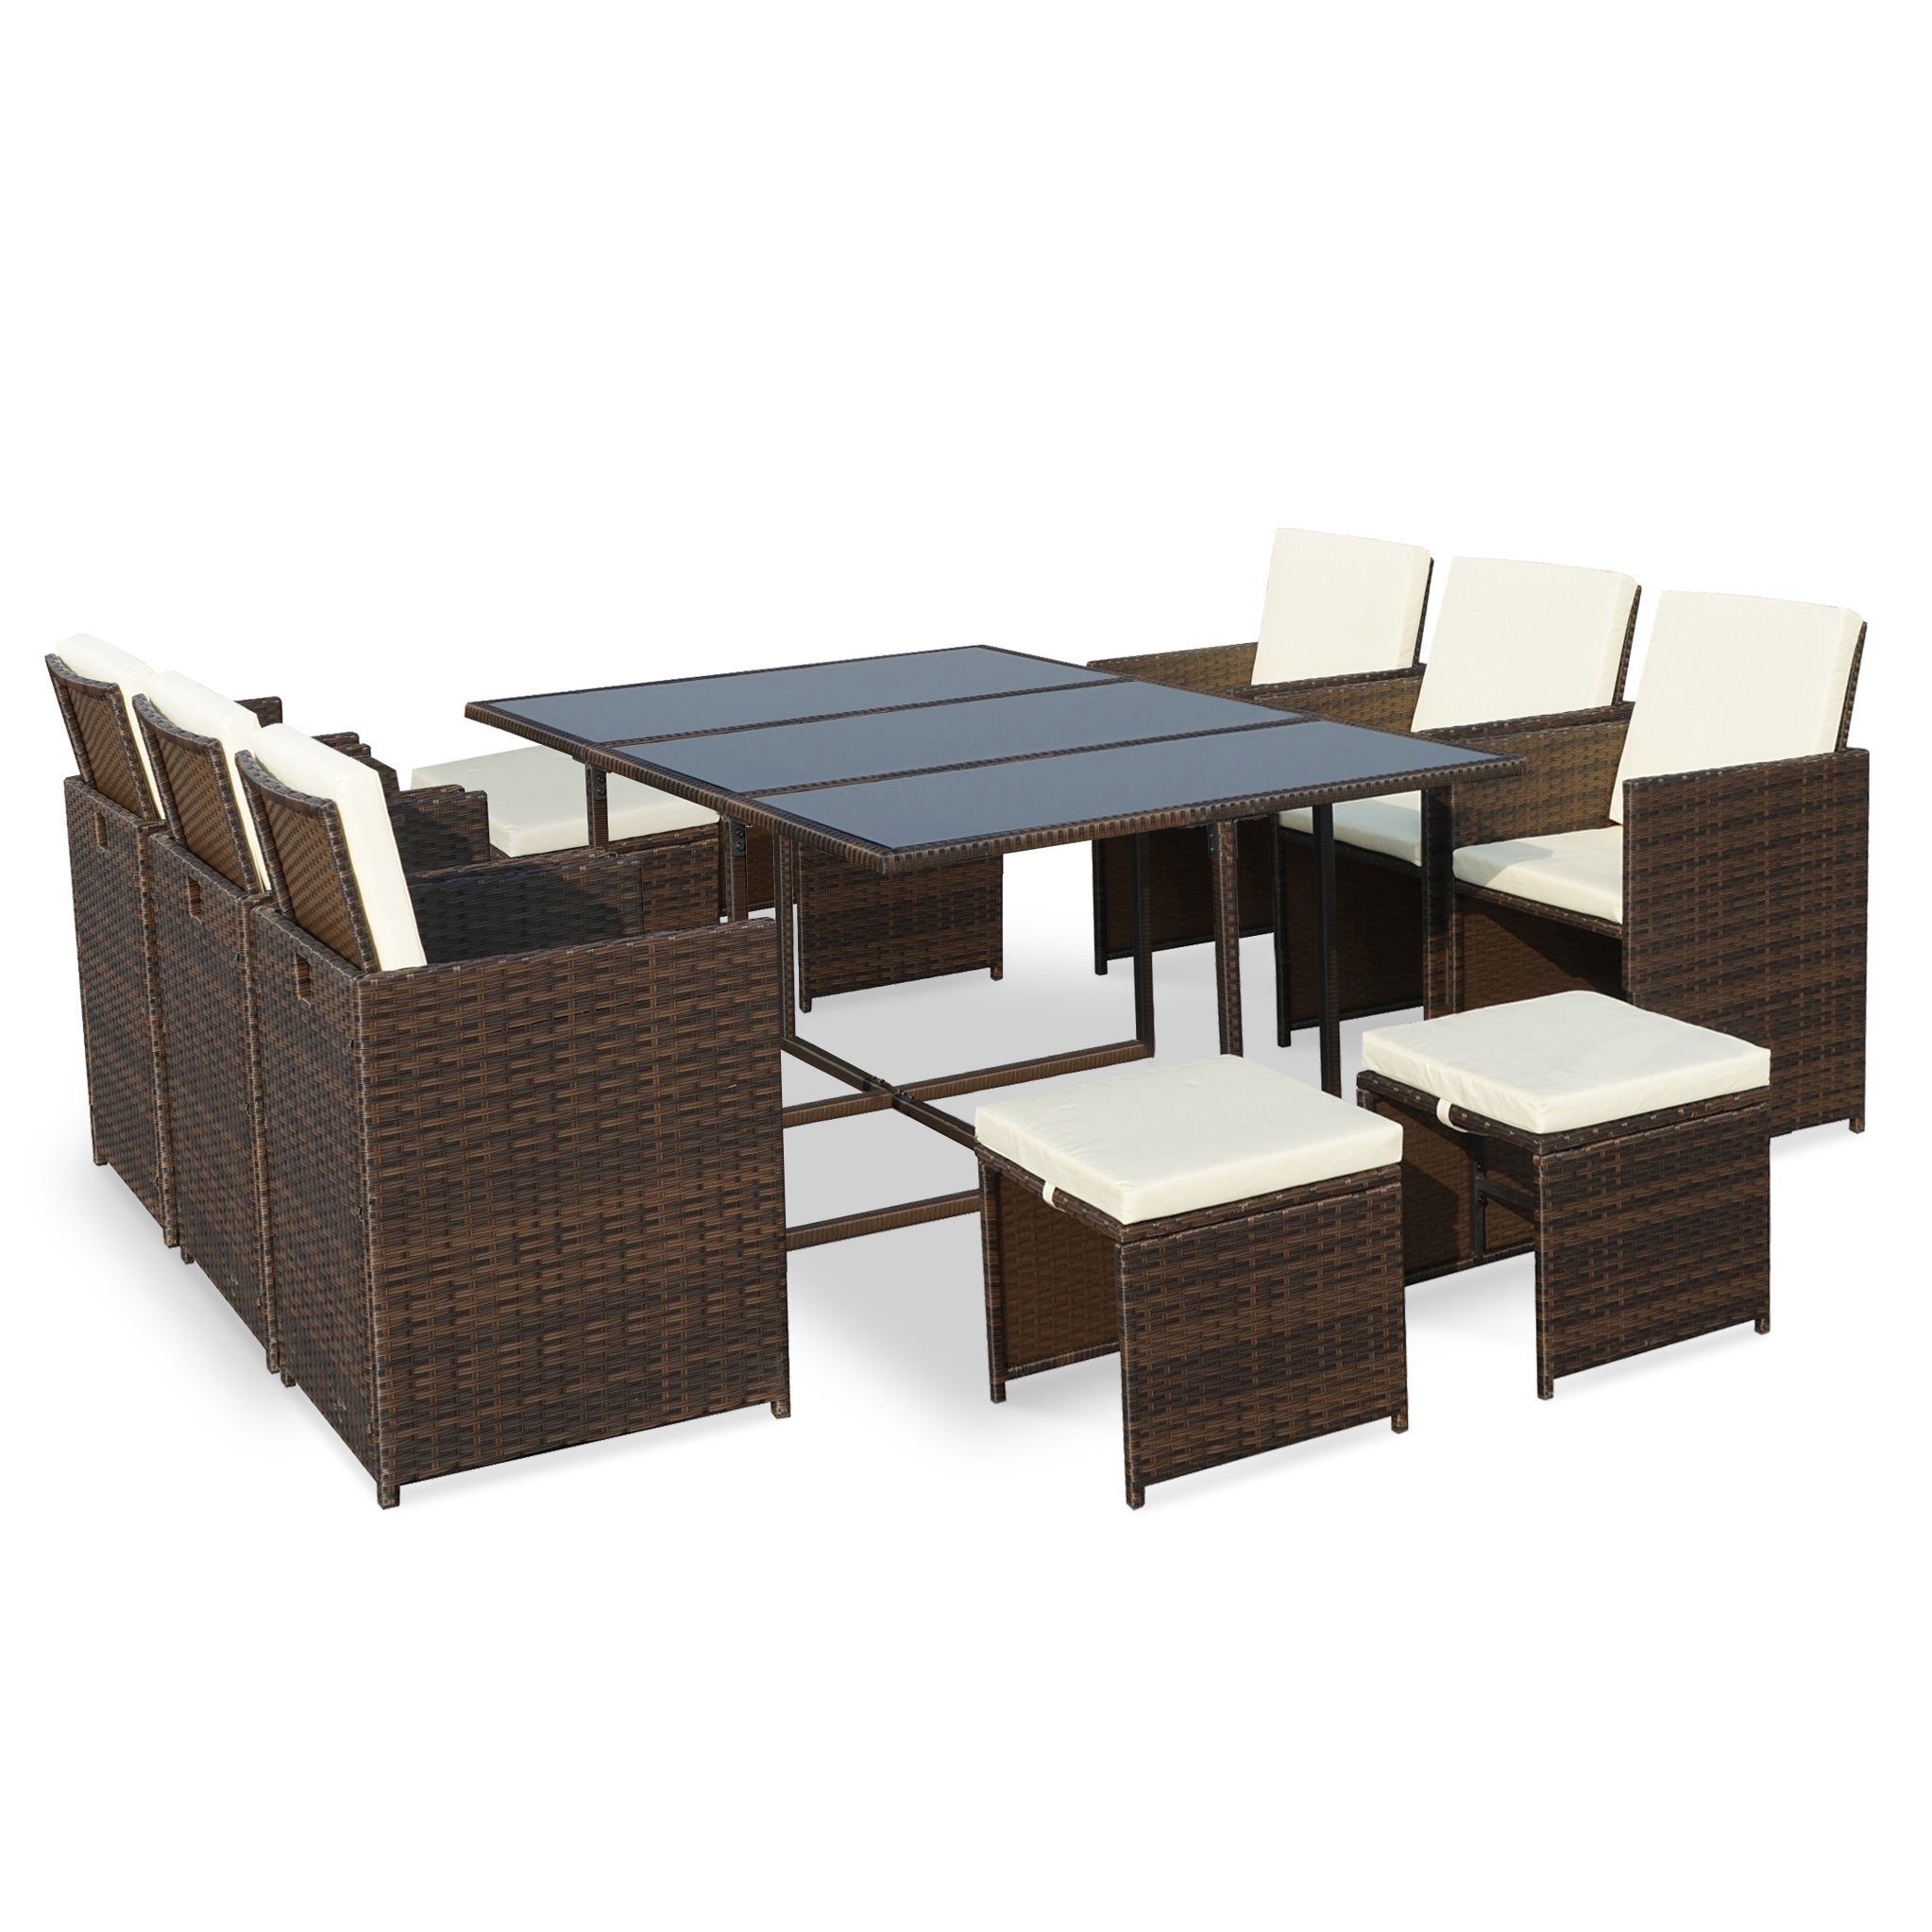 Cannes Outdoor 10 Seat Rattan Garden Cube Dining Set Brown Or Grey Roseland